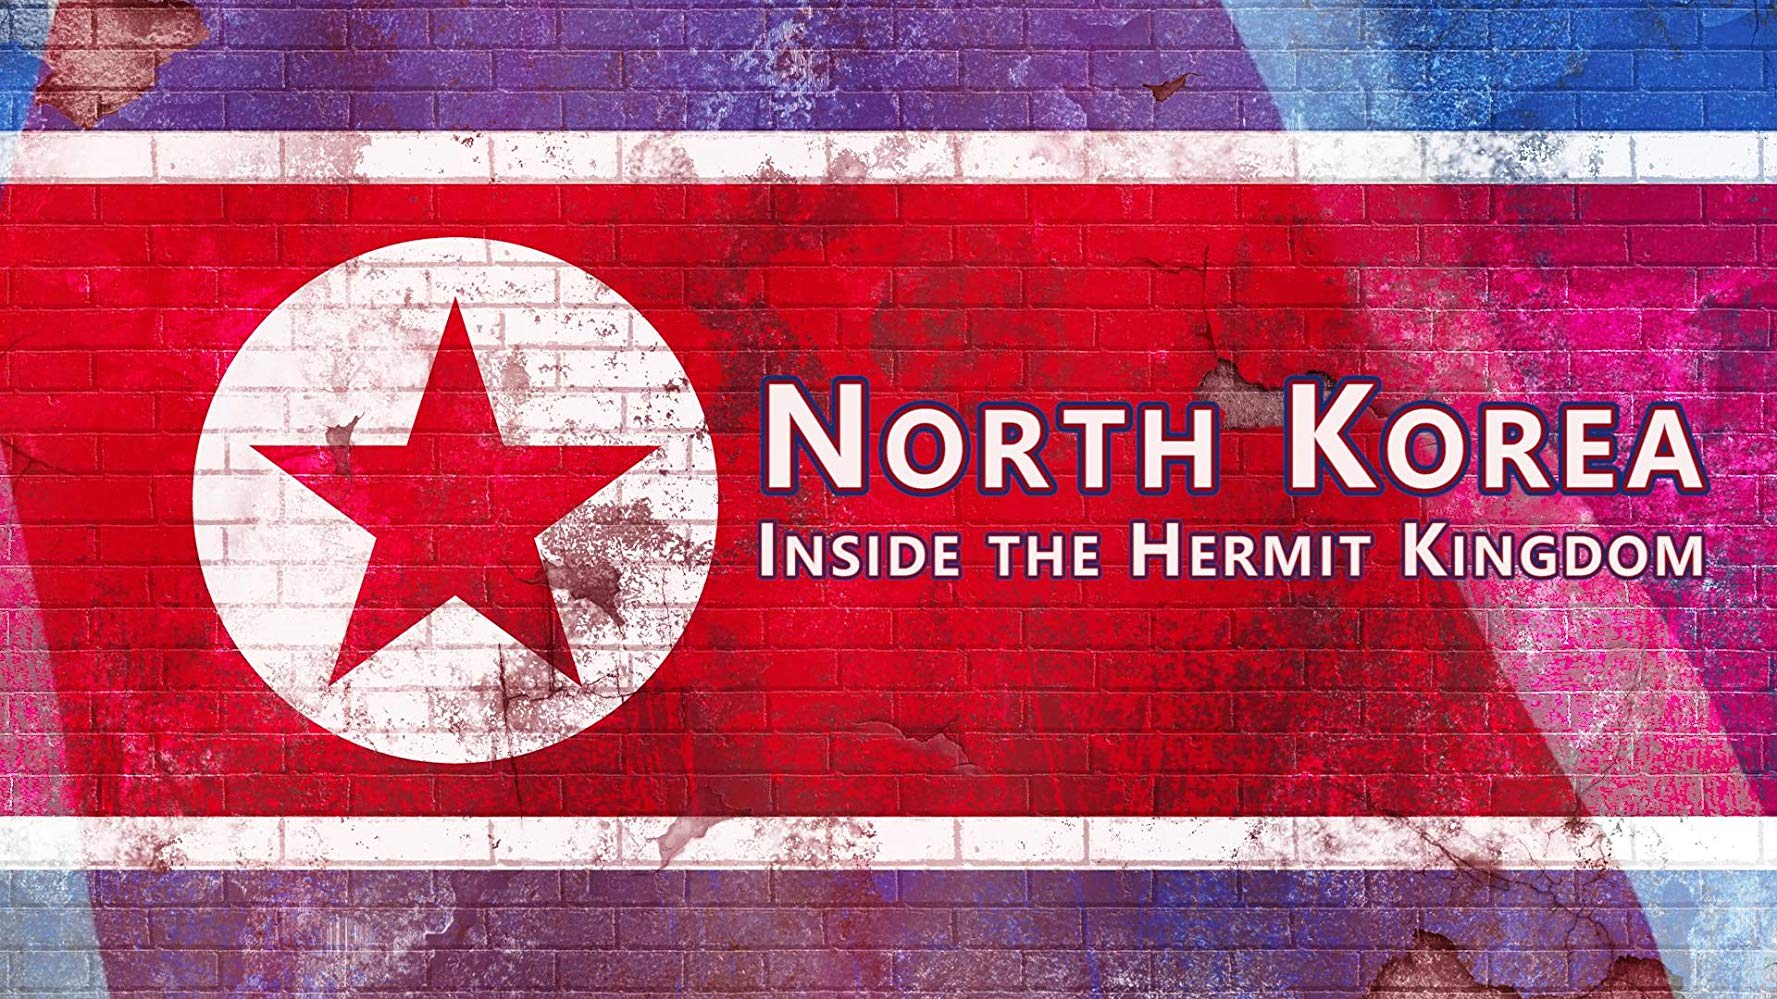 A look inside the Democratic People’s Republic of Korea — a dynastic one-party communist dictatorship closed off from the rest of the world.